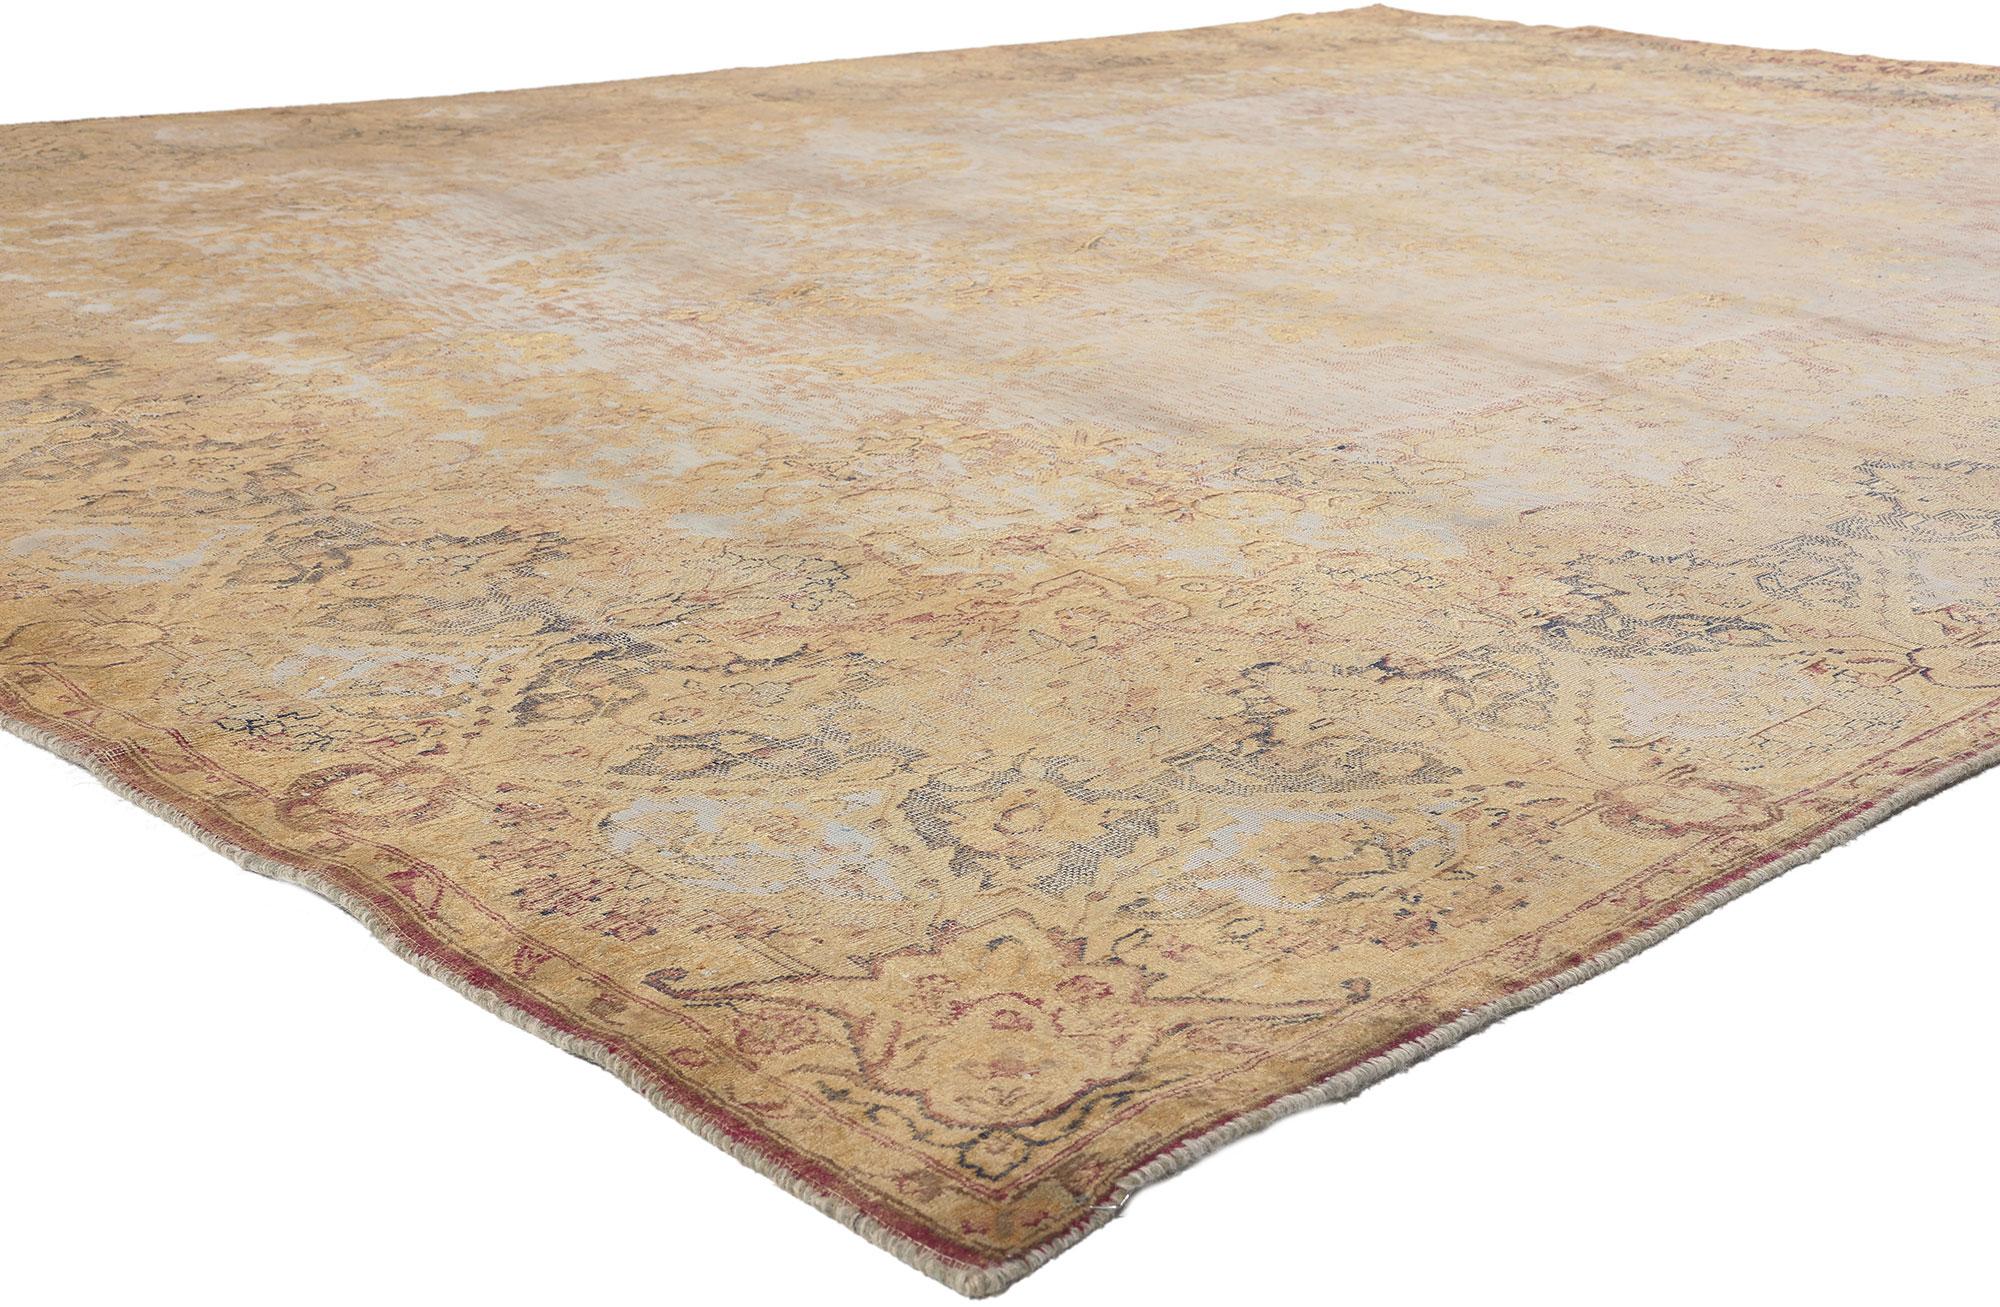 60766 Vintage Turkish Overdyed Rug, 09'07 x 13'04.
Prepare to be charmed by a rug that's a fusion of French Industrial and Belgian Chic – it's like a stylish rendezvous in a design lover's dream. This hand-knotted wool vintage Turkish overdyed rug